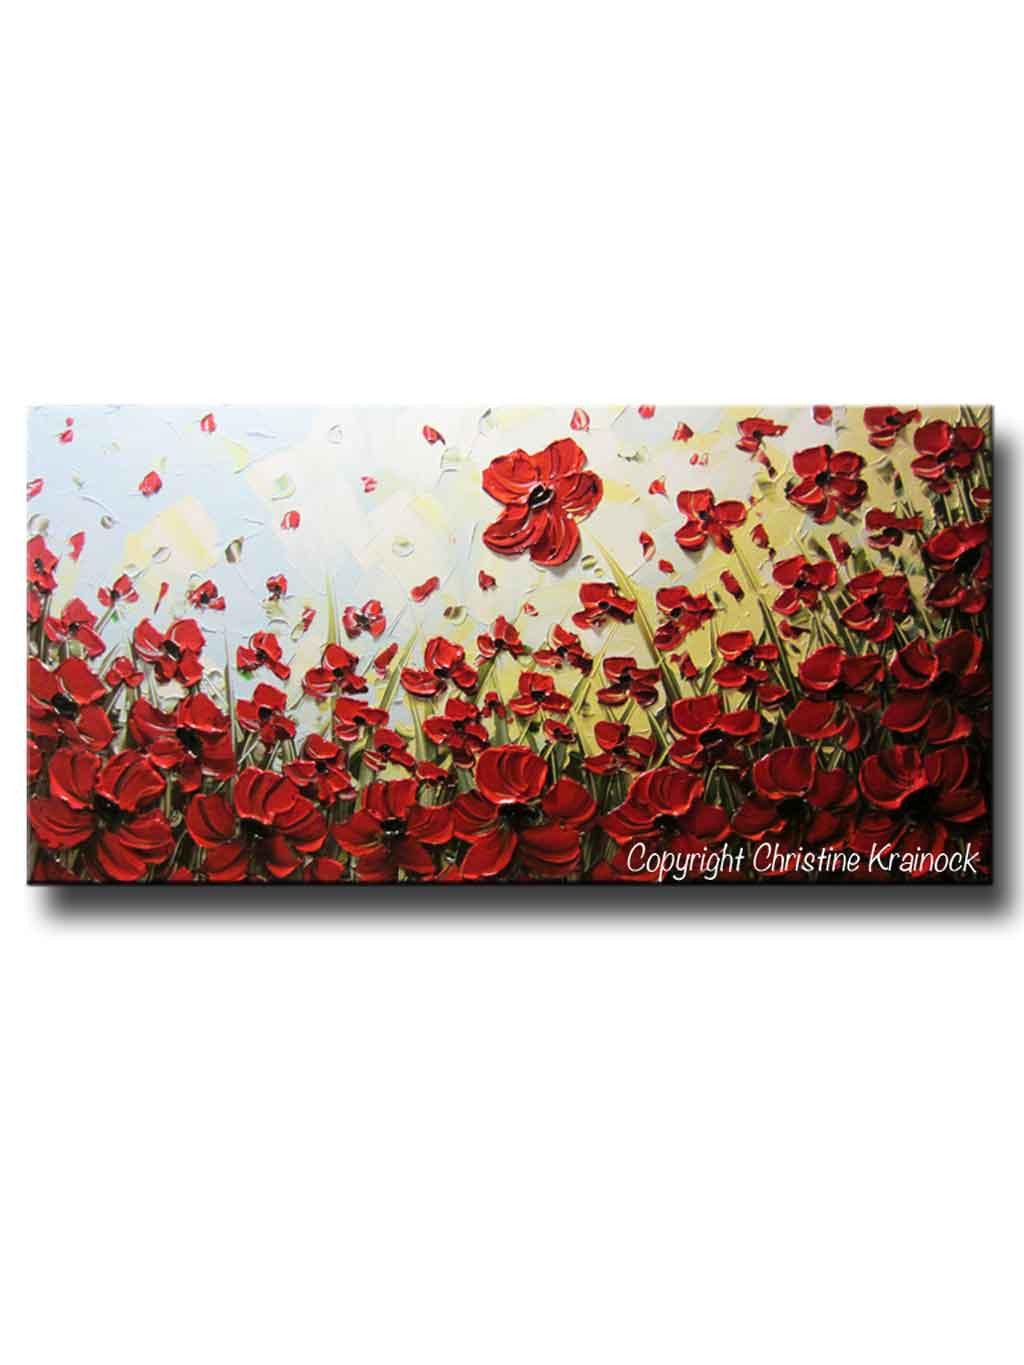 ORIGINAL Art Abstract Painting Red Flowers Poppies Large Canvas Wall Art Textured Landscape Poppy - Christine Krainock Art - Contemporary Art by Christine - 1